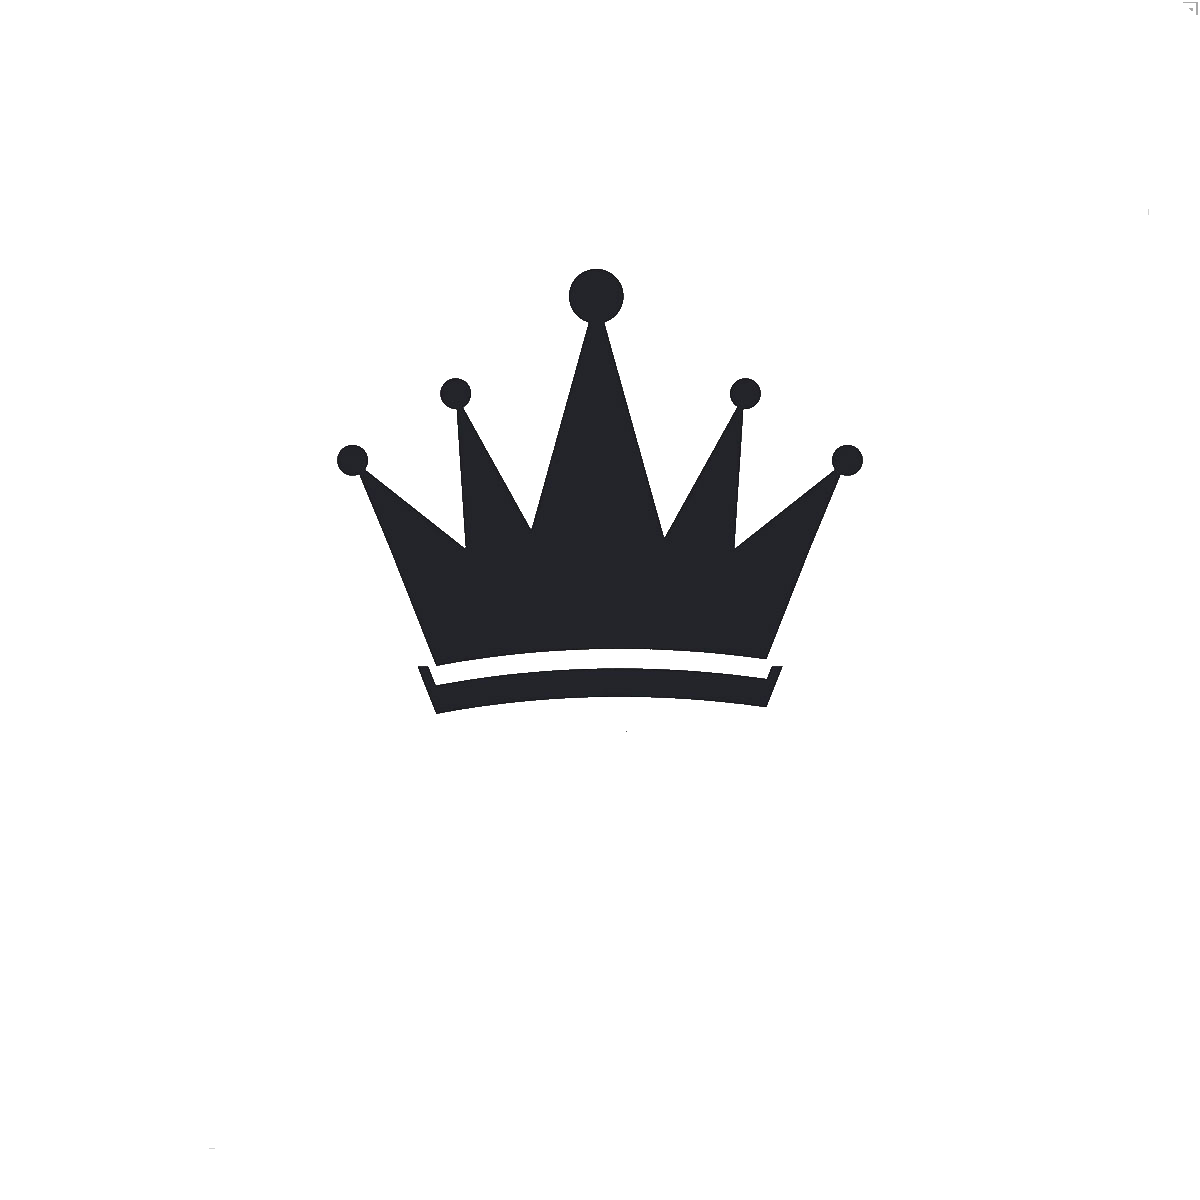 Silhouette Crown Download HD PNG Clipart